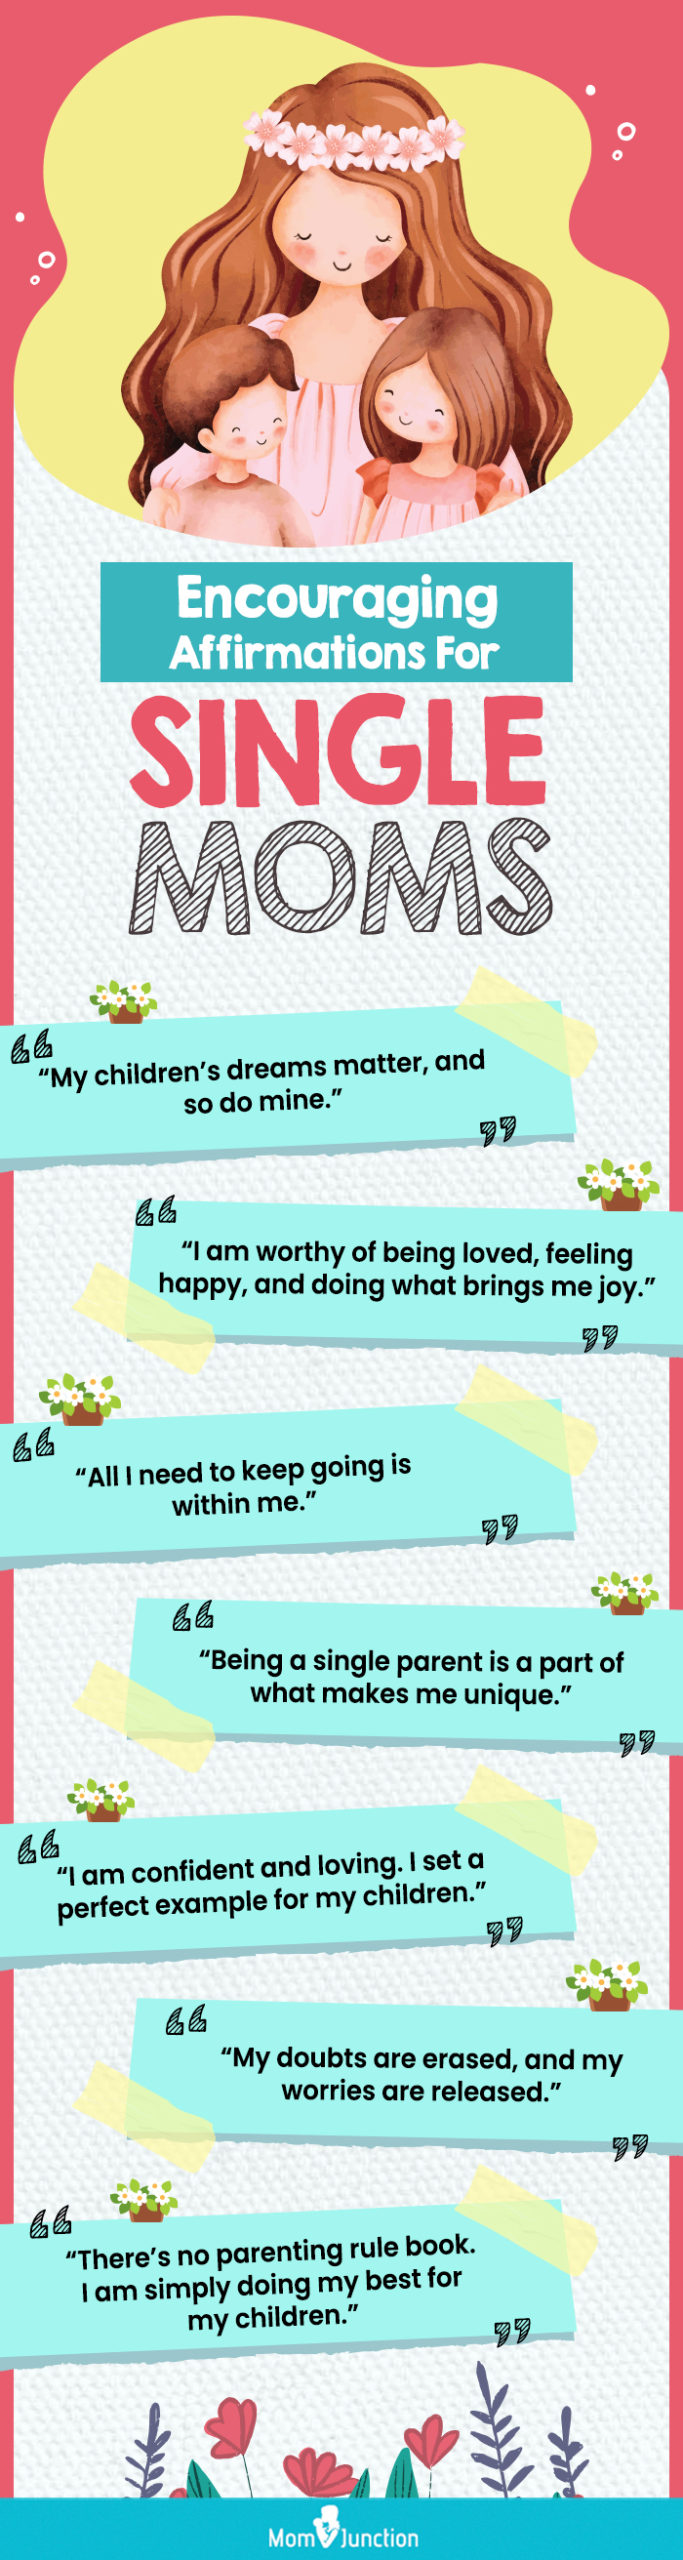 encouraging affirmations for single moms [infographic]